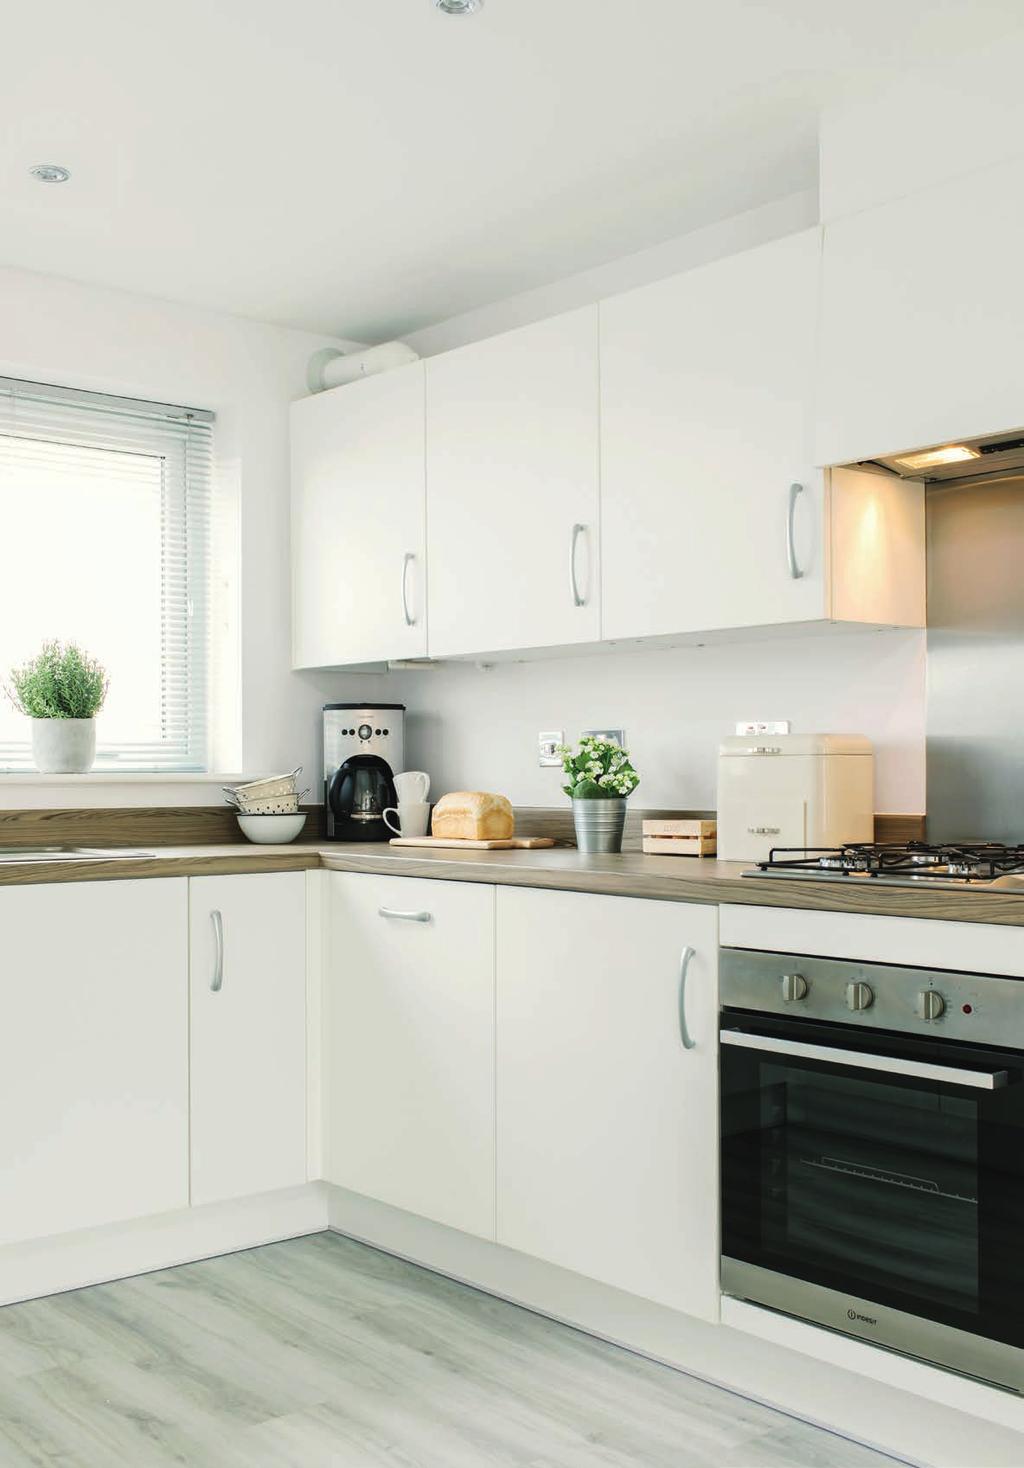 5 Kitchen Your kitchen is the heart of your home. So pick a style, colour and finish that really works for you.